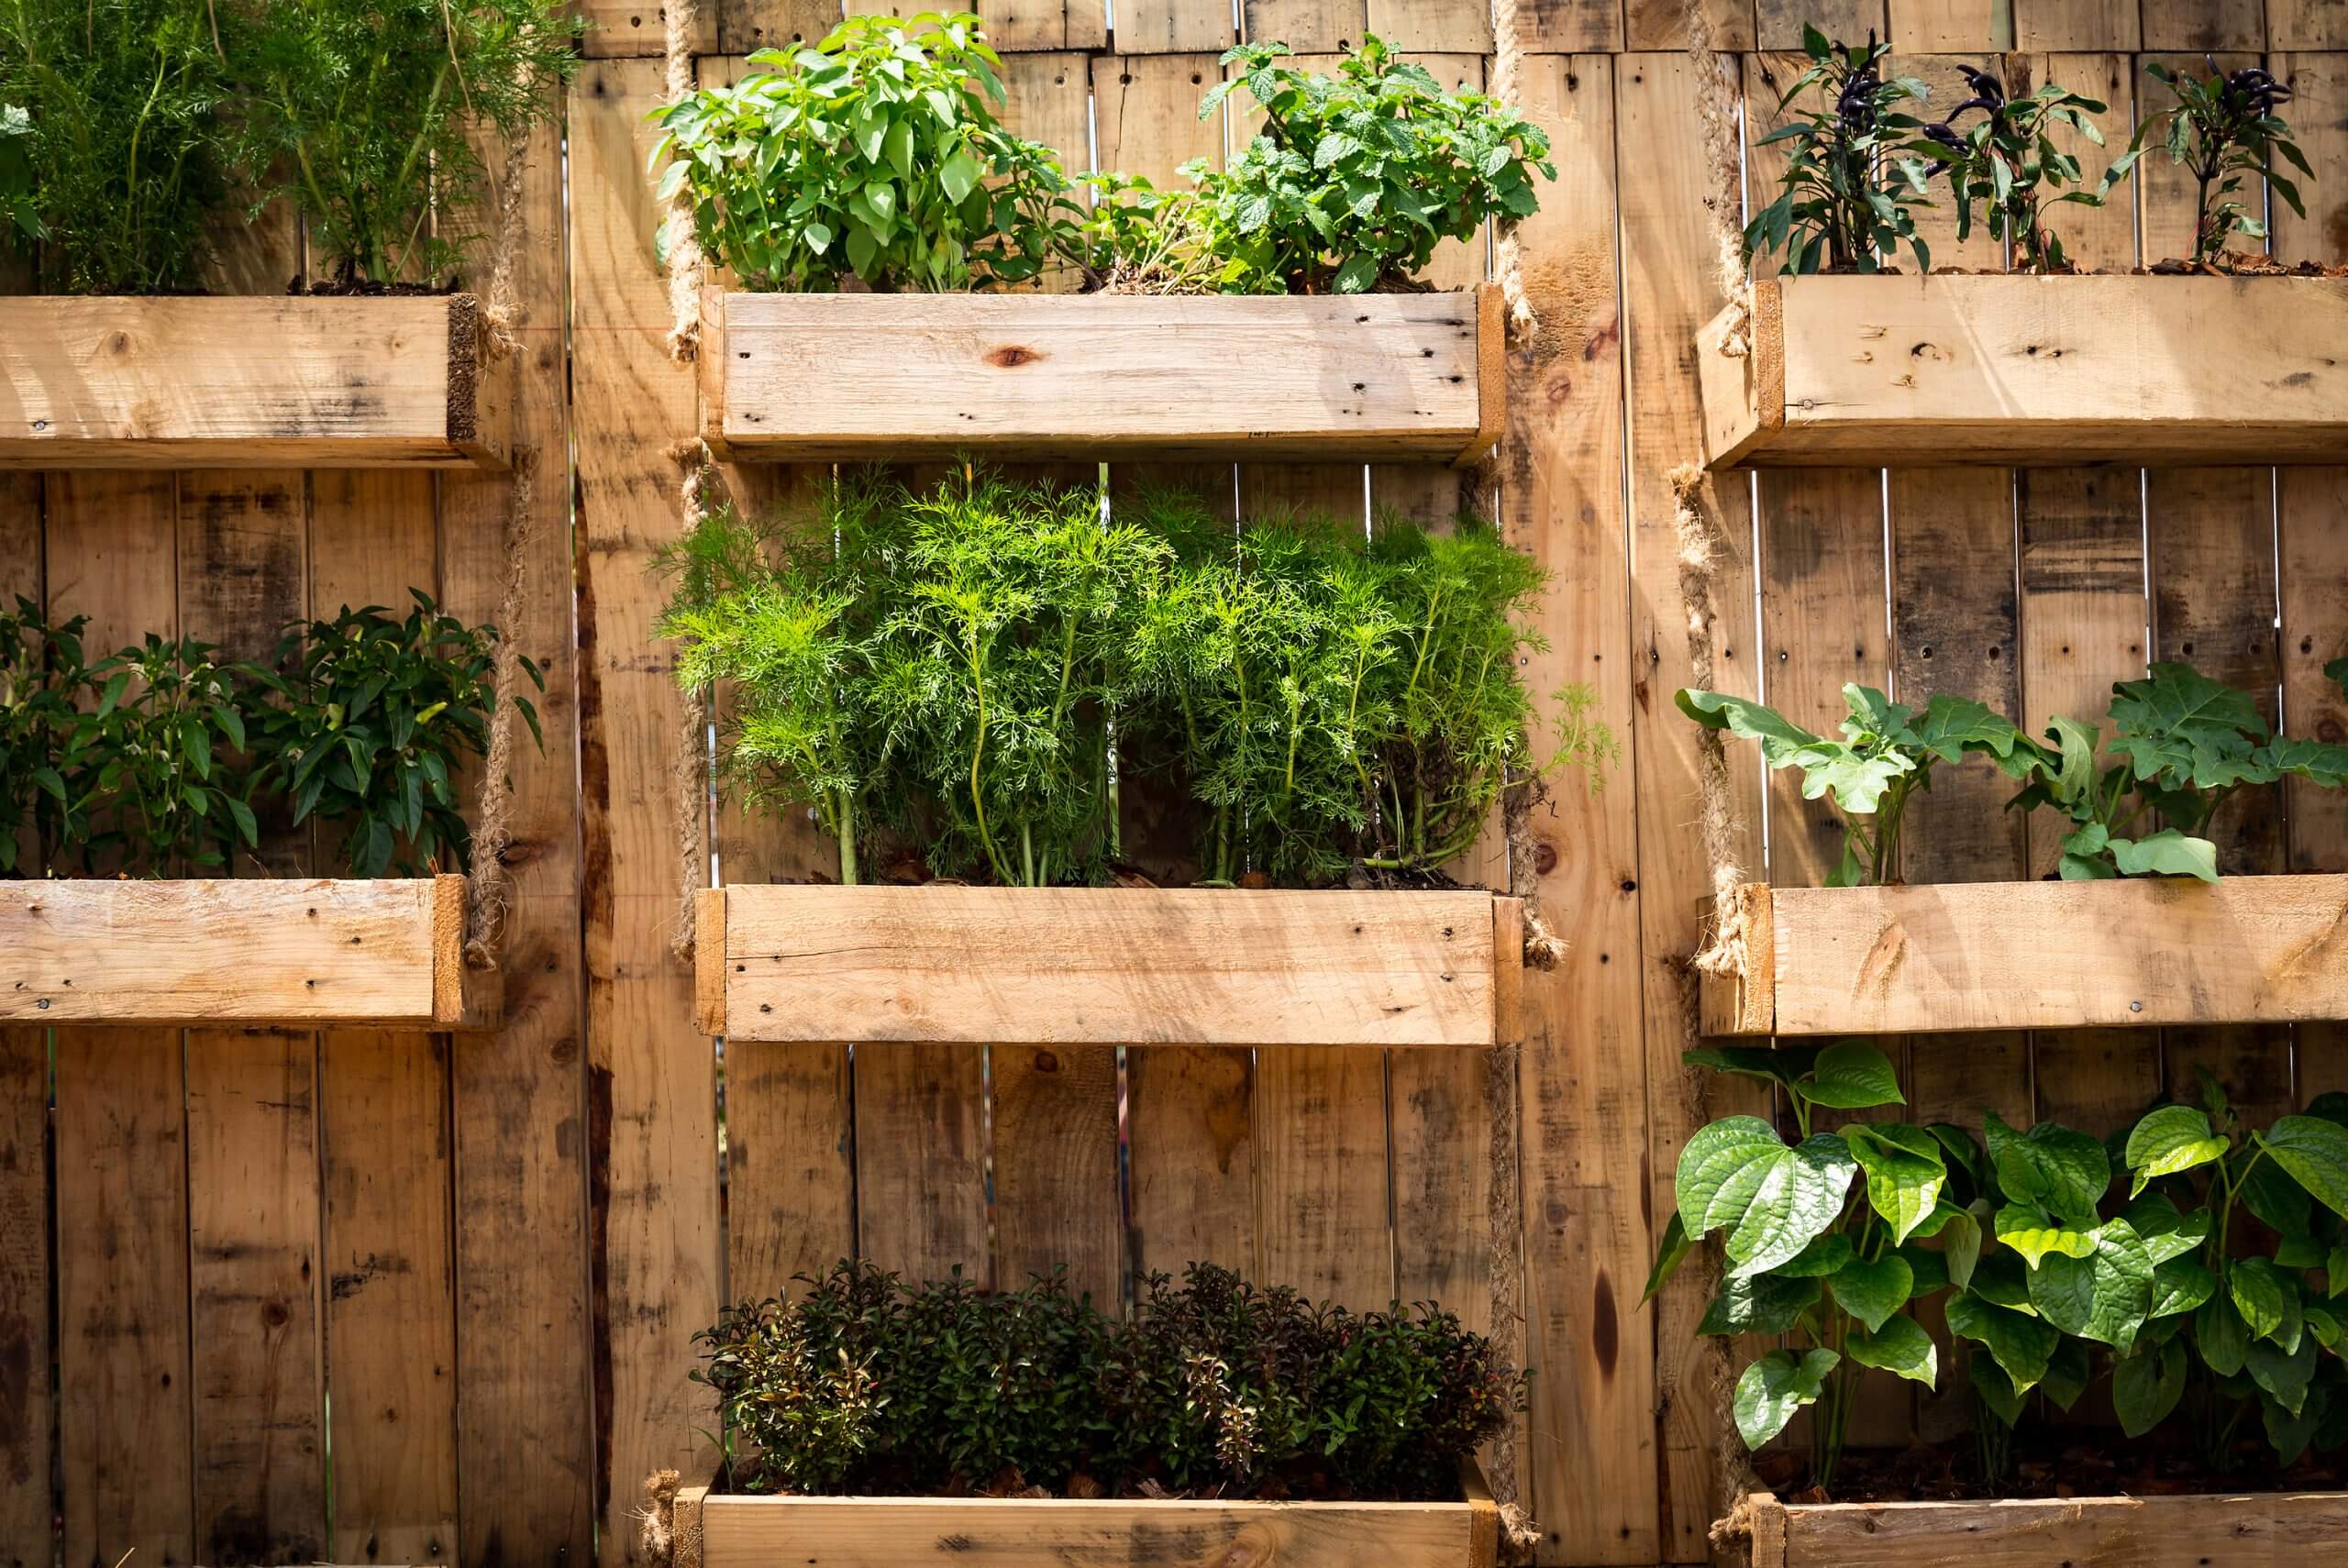 The 20 Best Vegetable Garden Layouts To Try - 121